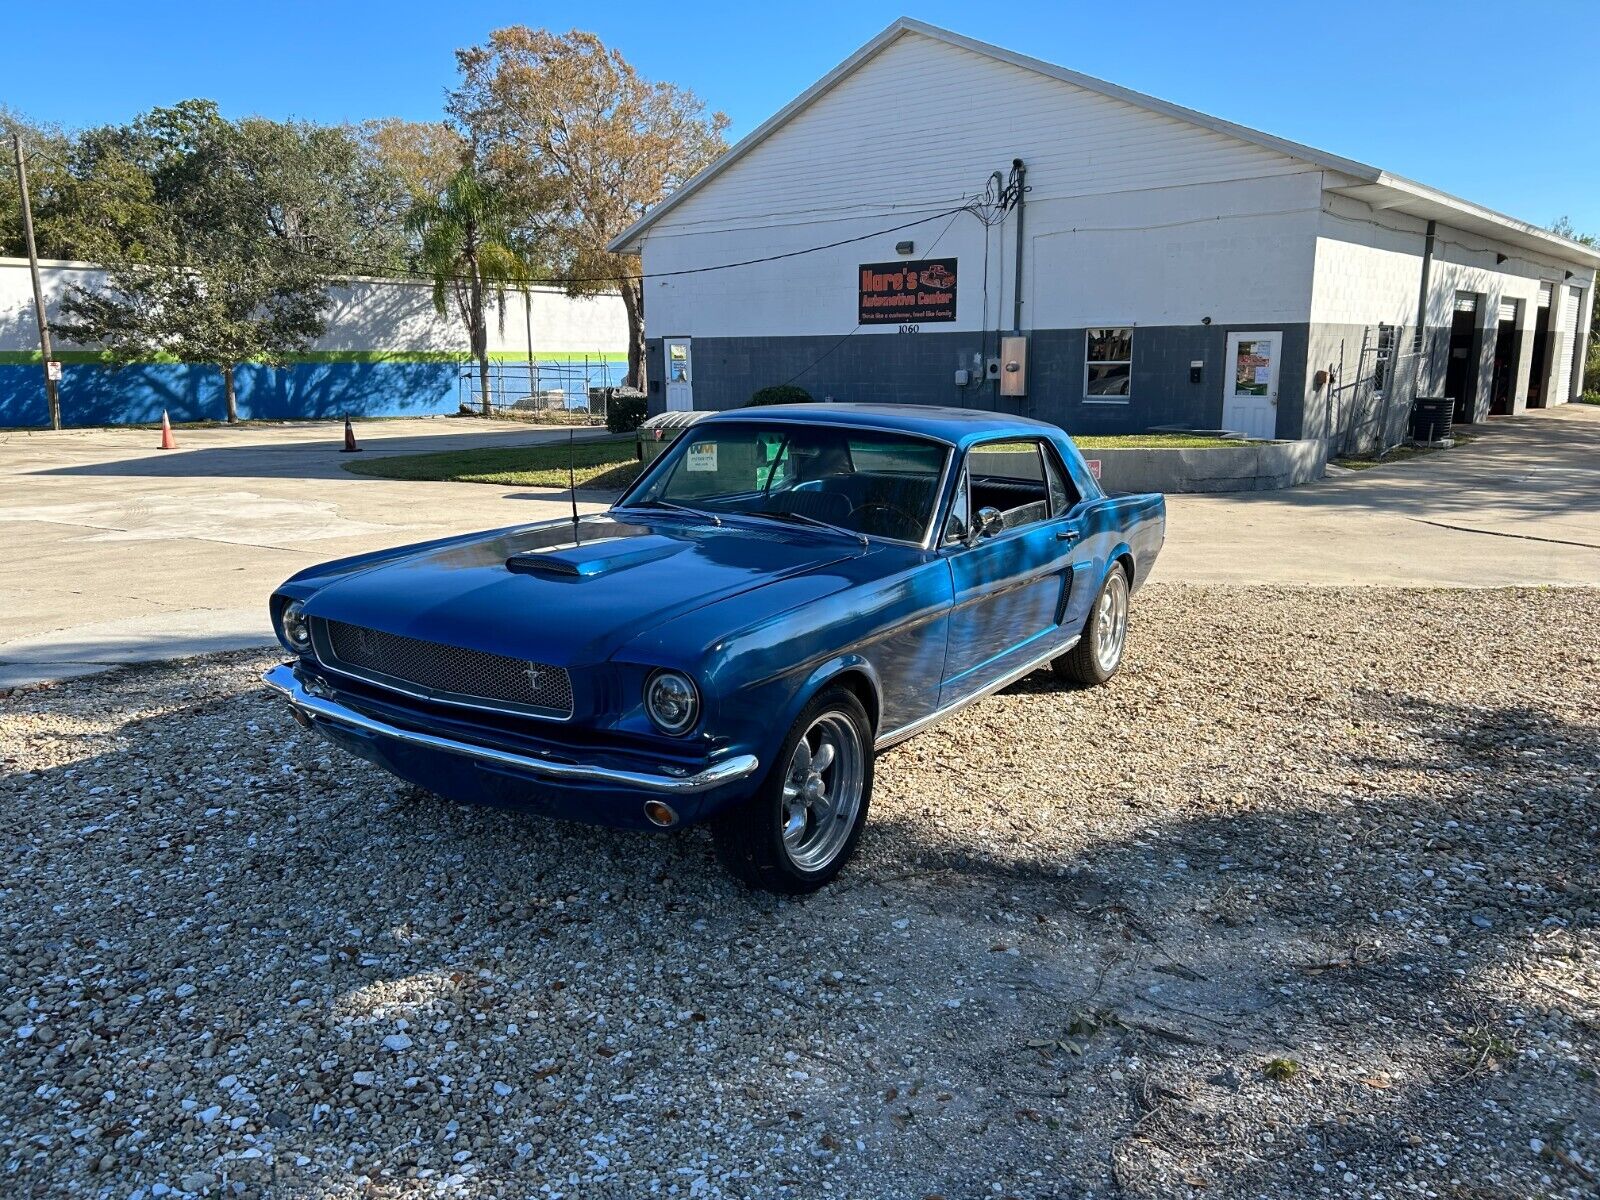 Ford Mustang Coupe 1964 à vendre